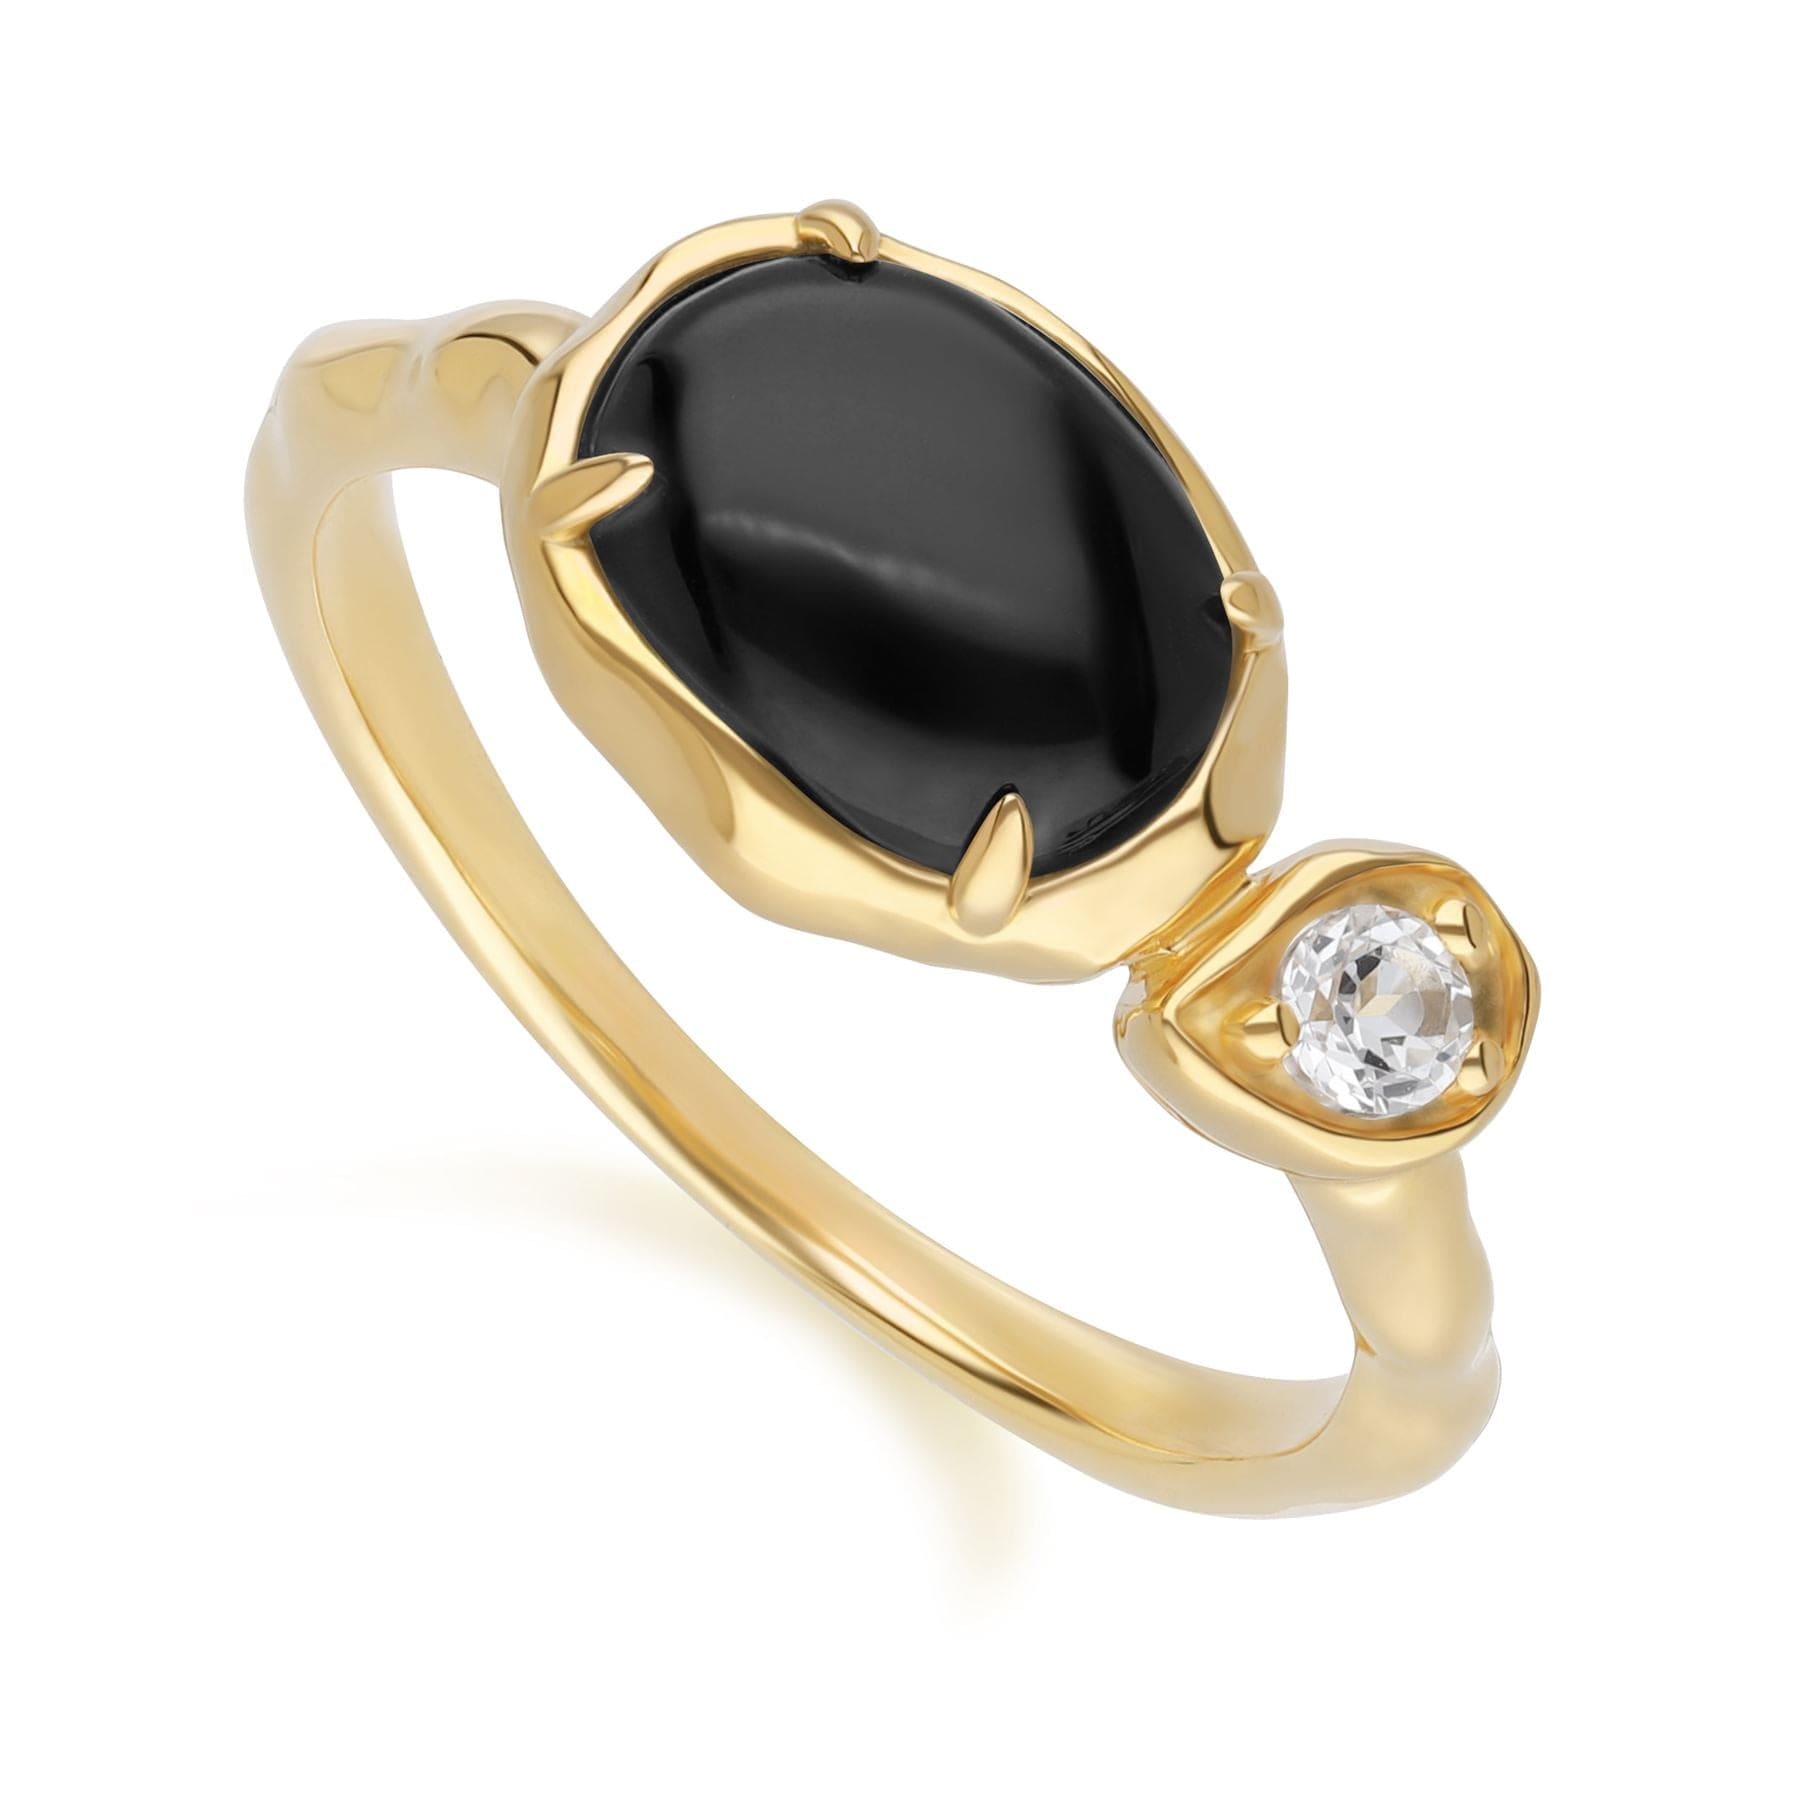 Irregular Oval Black Onyx & Topaz Ring In 18ct Gold Plated SterlIng Silver